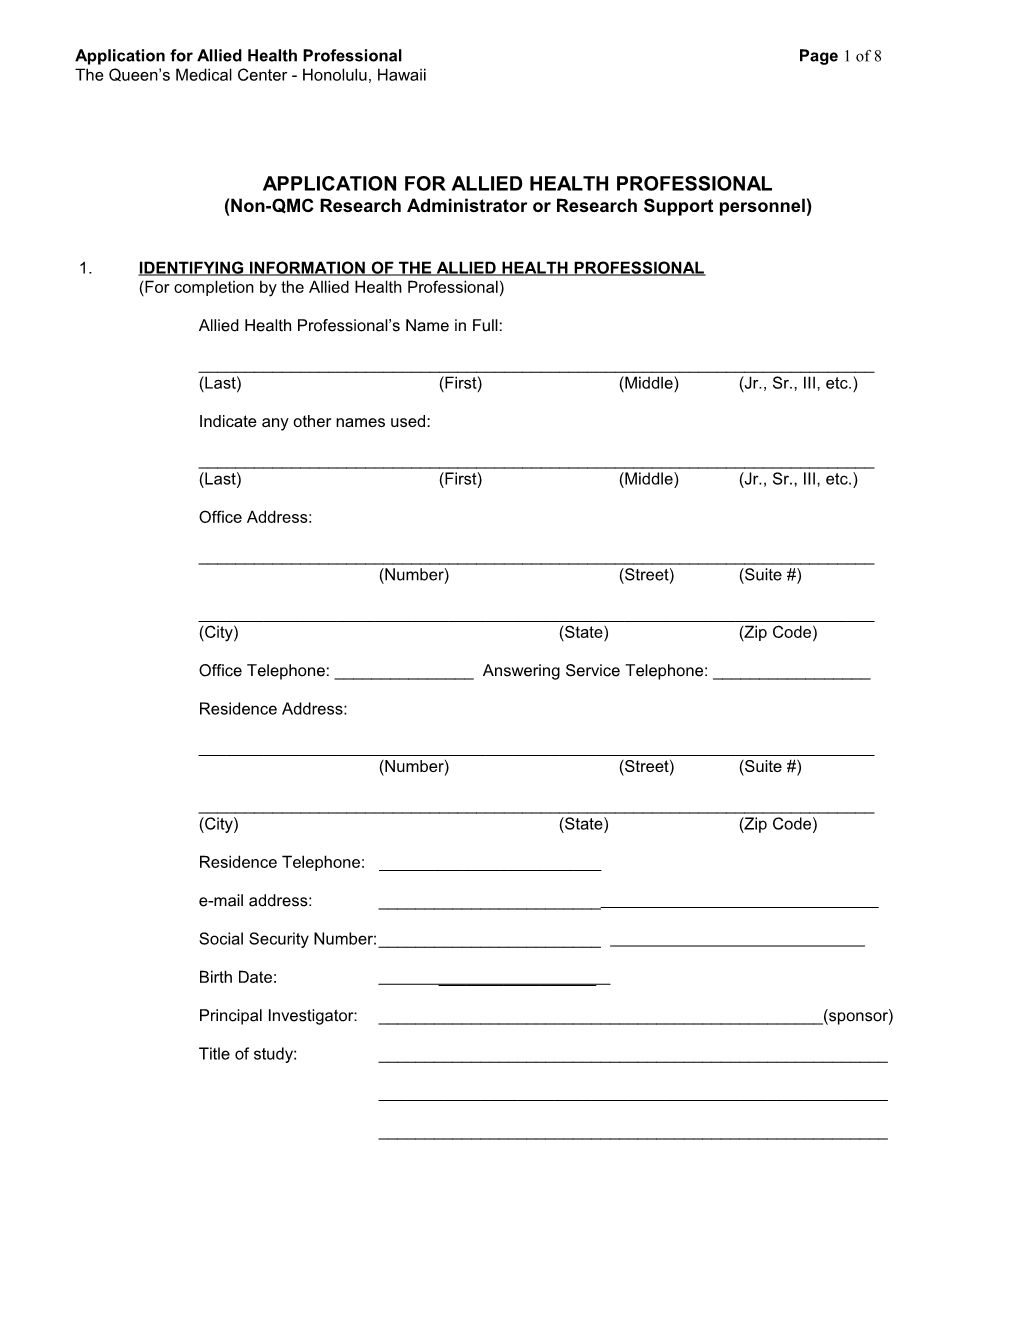 Application for Allied Health Professional